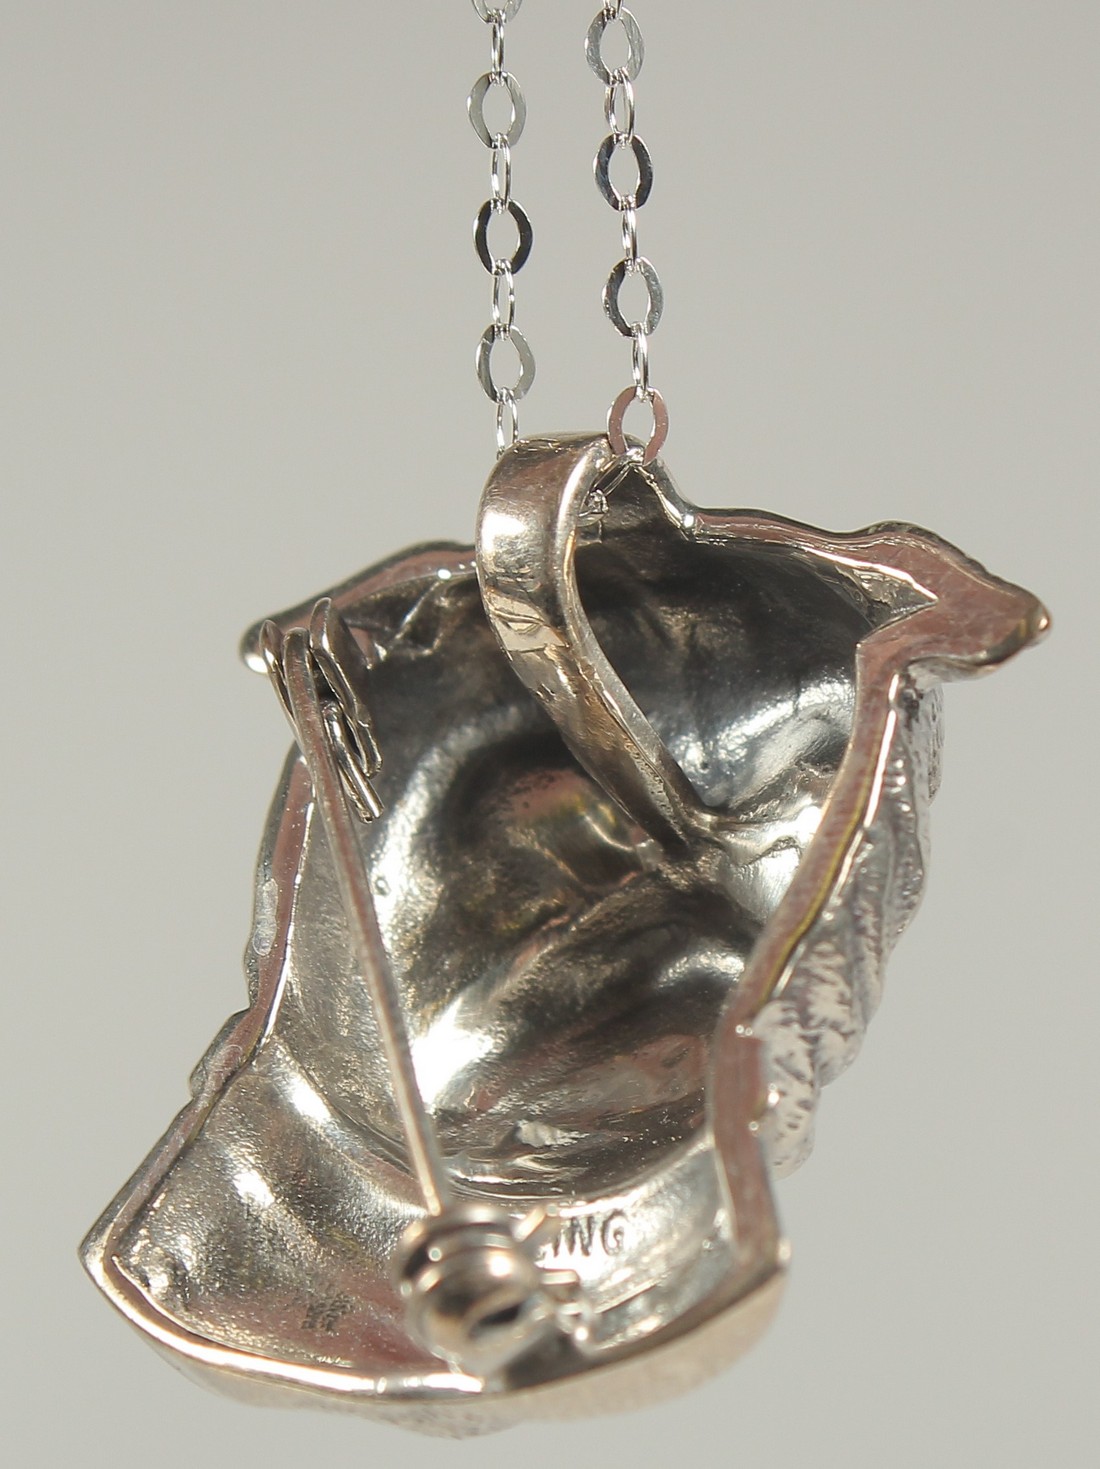 A silver pug dog brooch or pendant on a chain in a box. - Image 2 of 3